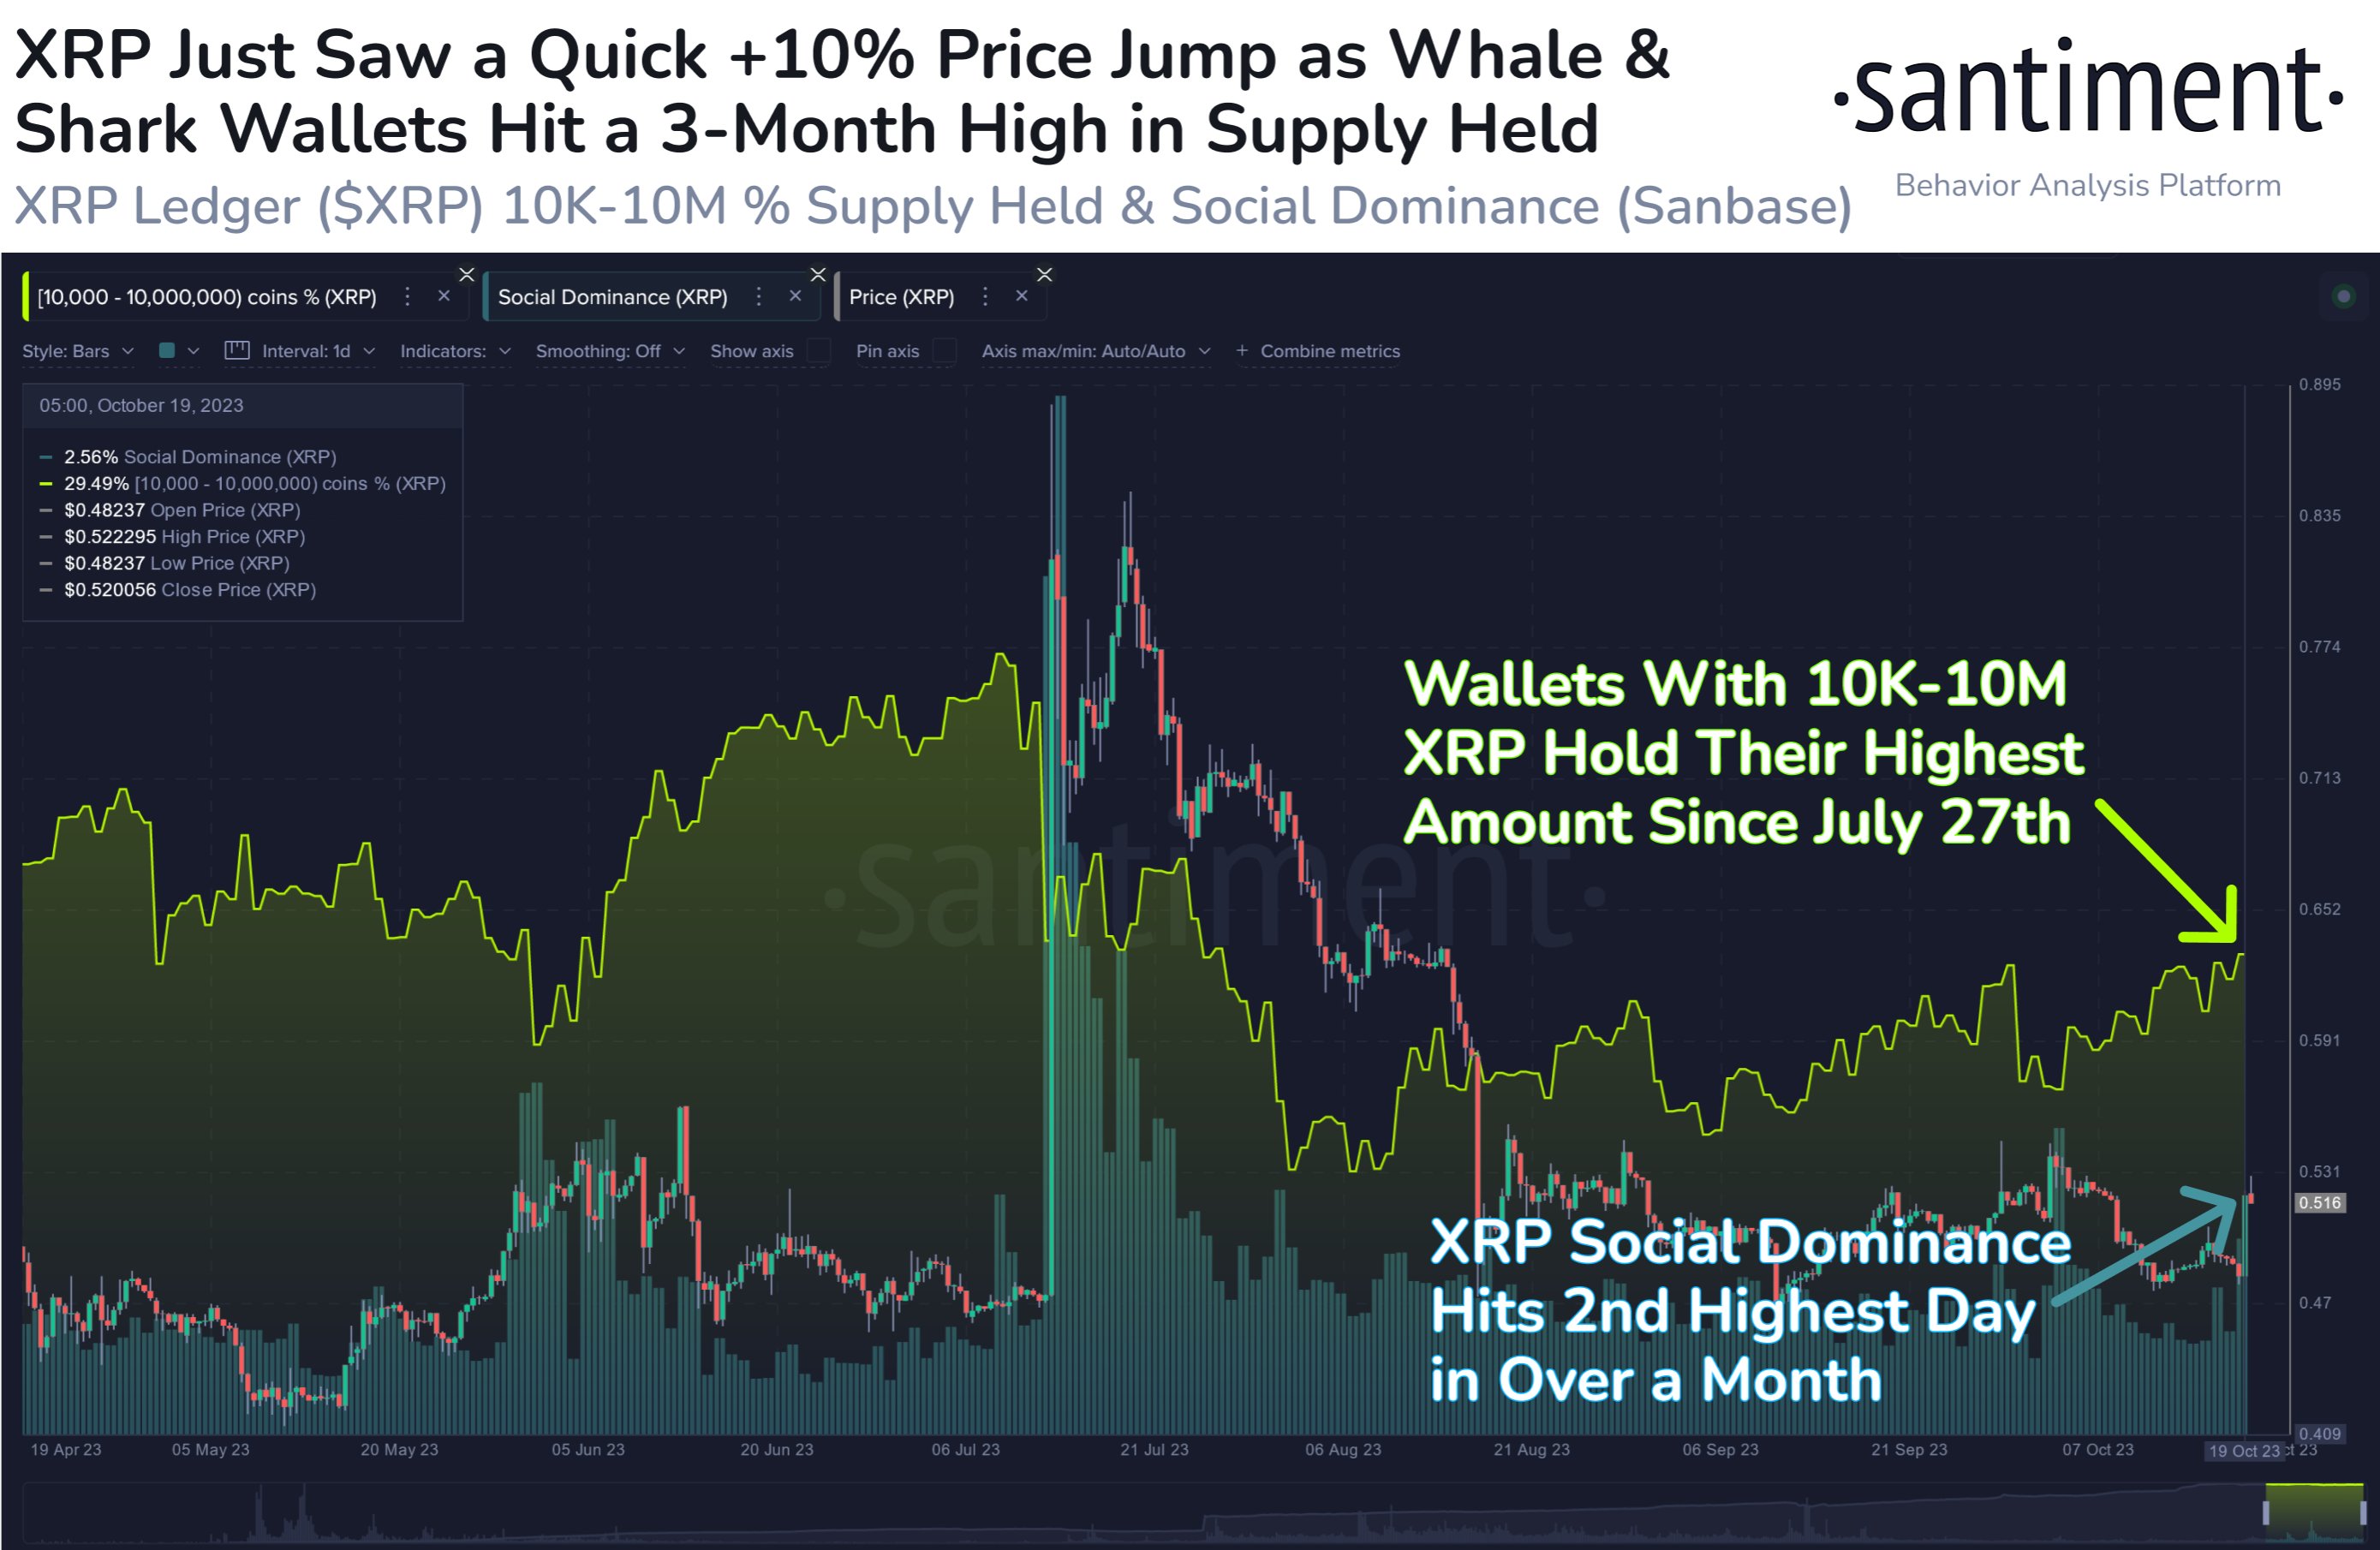 XRP Sharks & Whales